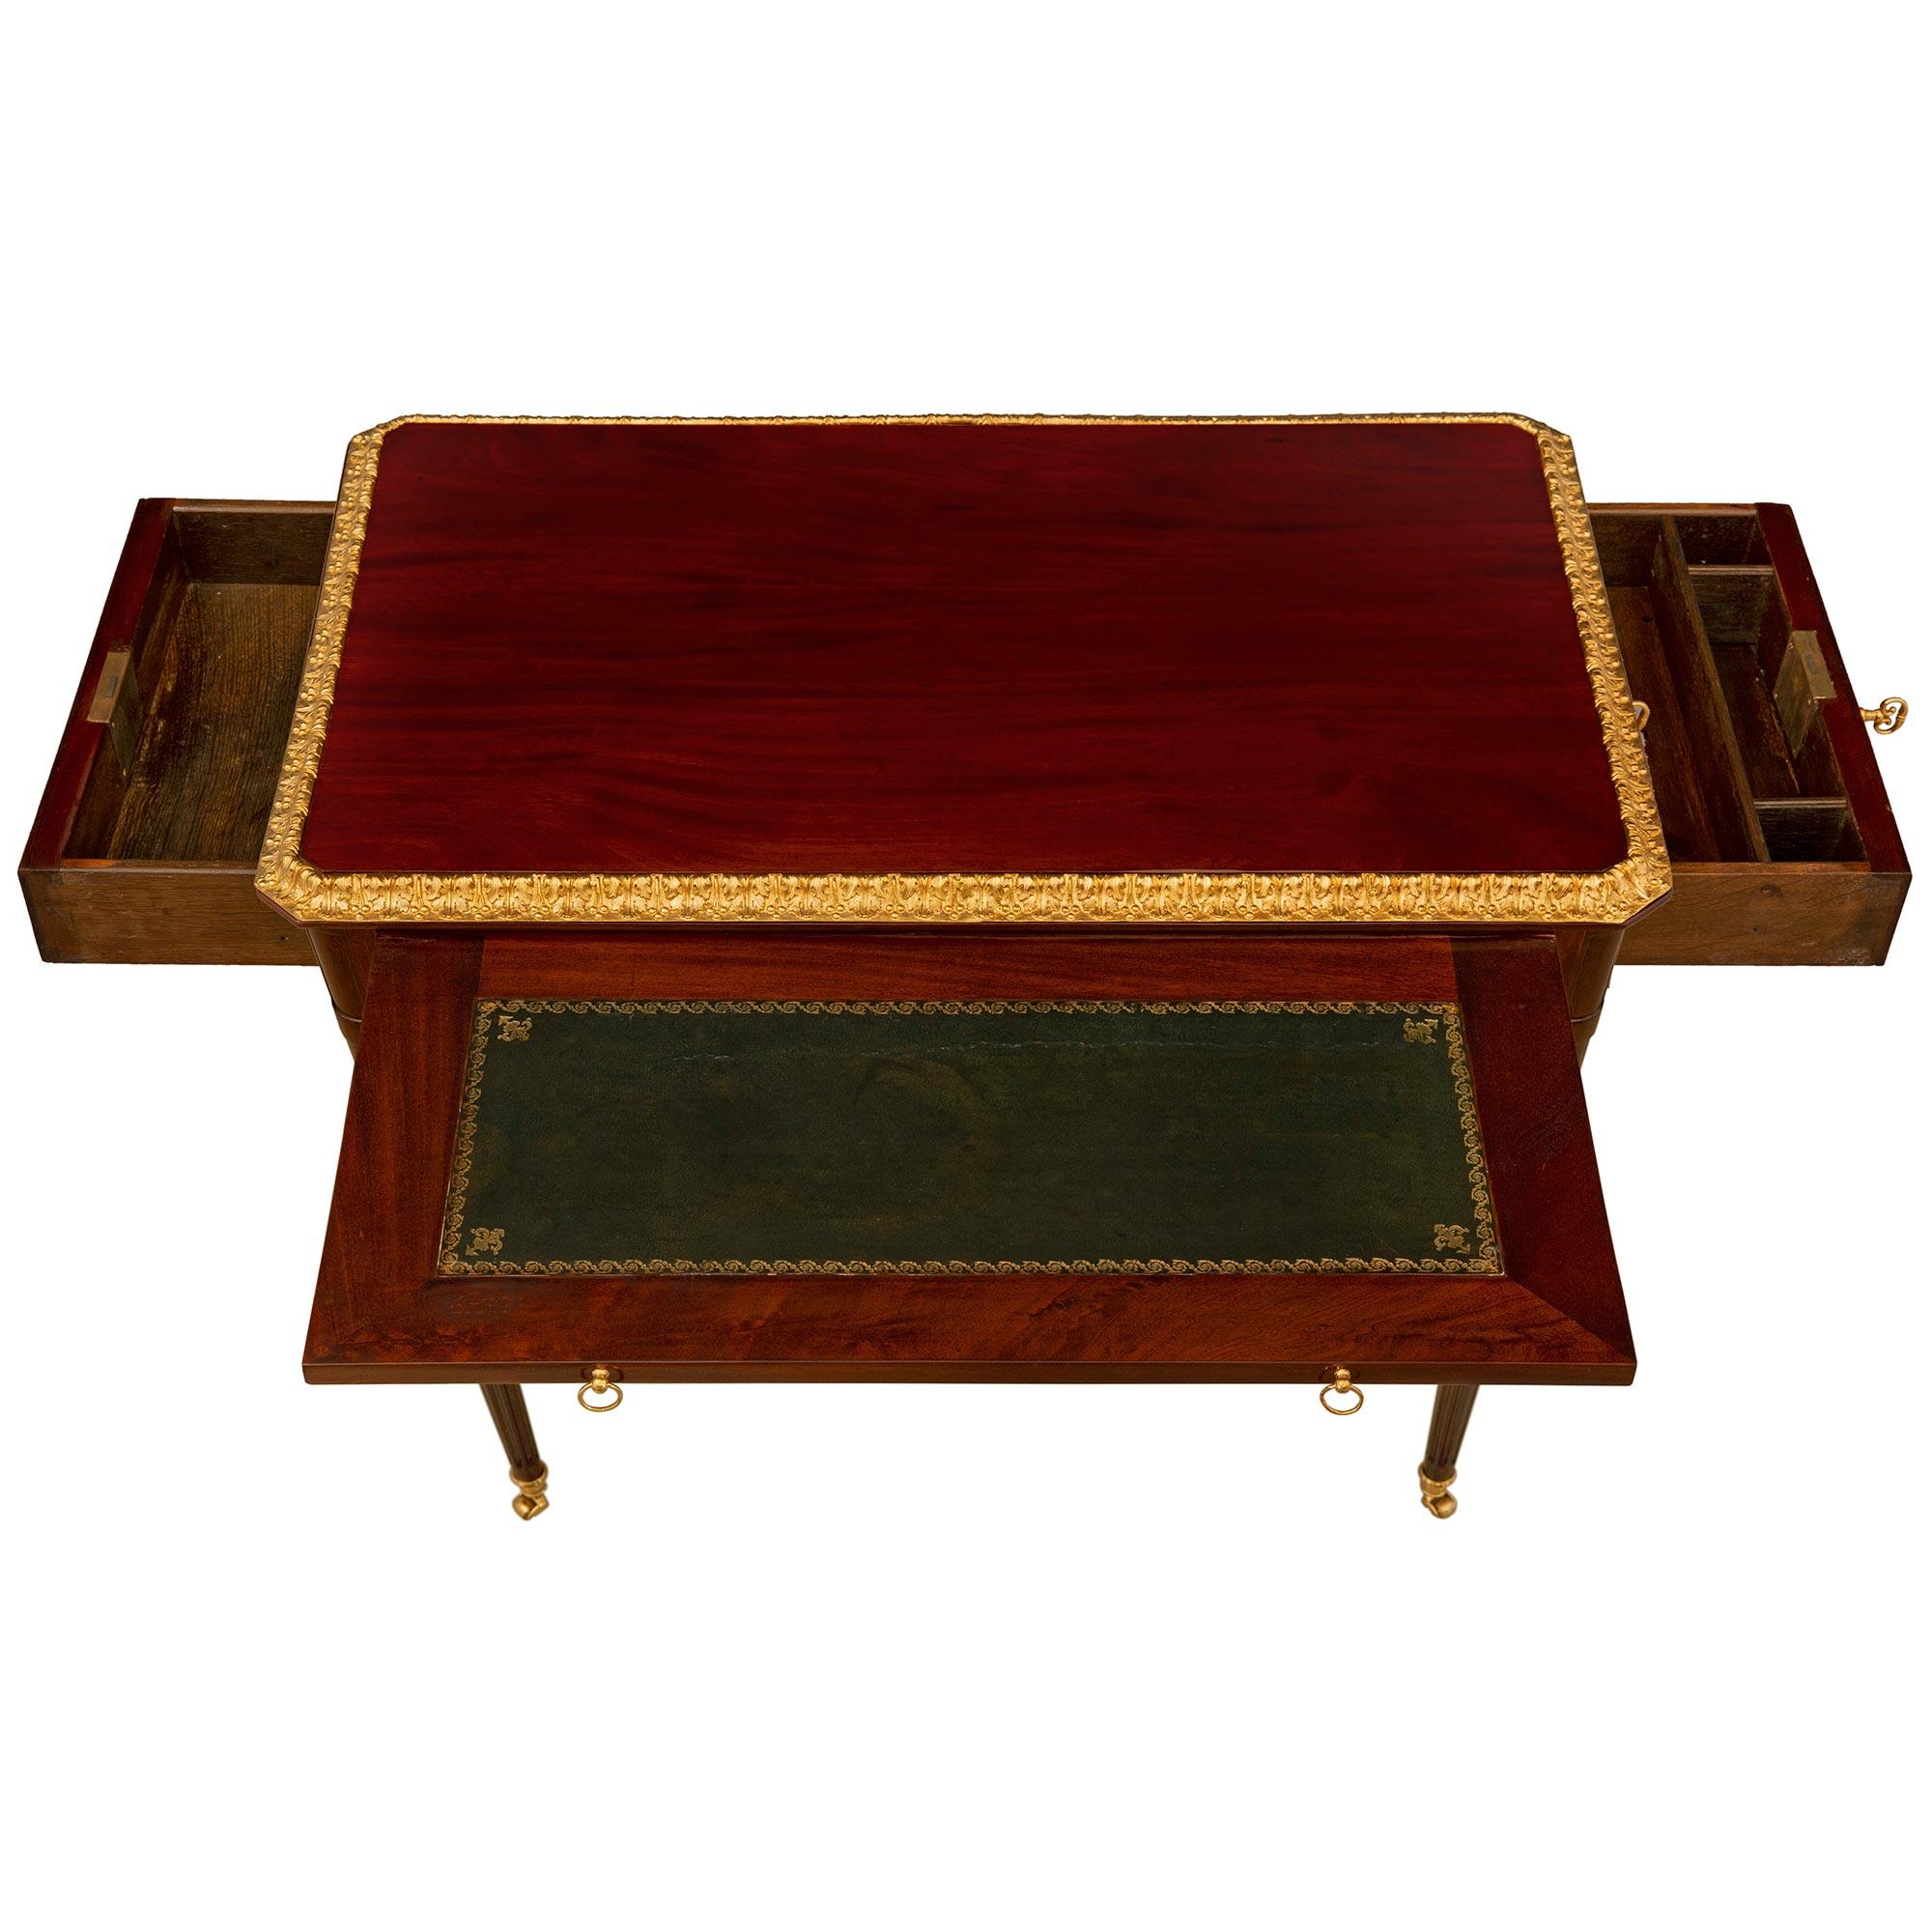 An elegant and very high quality French 18th century Louis XVI period Mahogany and ormolu side table/desk. The two drawer rectangular table with a pull out is raised by slender circular tapered fluted legs with their original ormolu casters. The